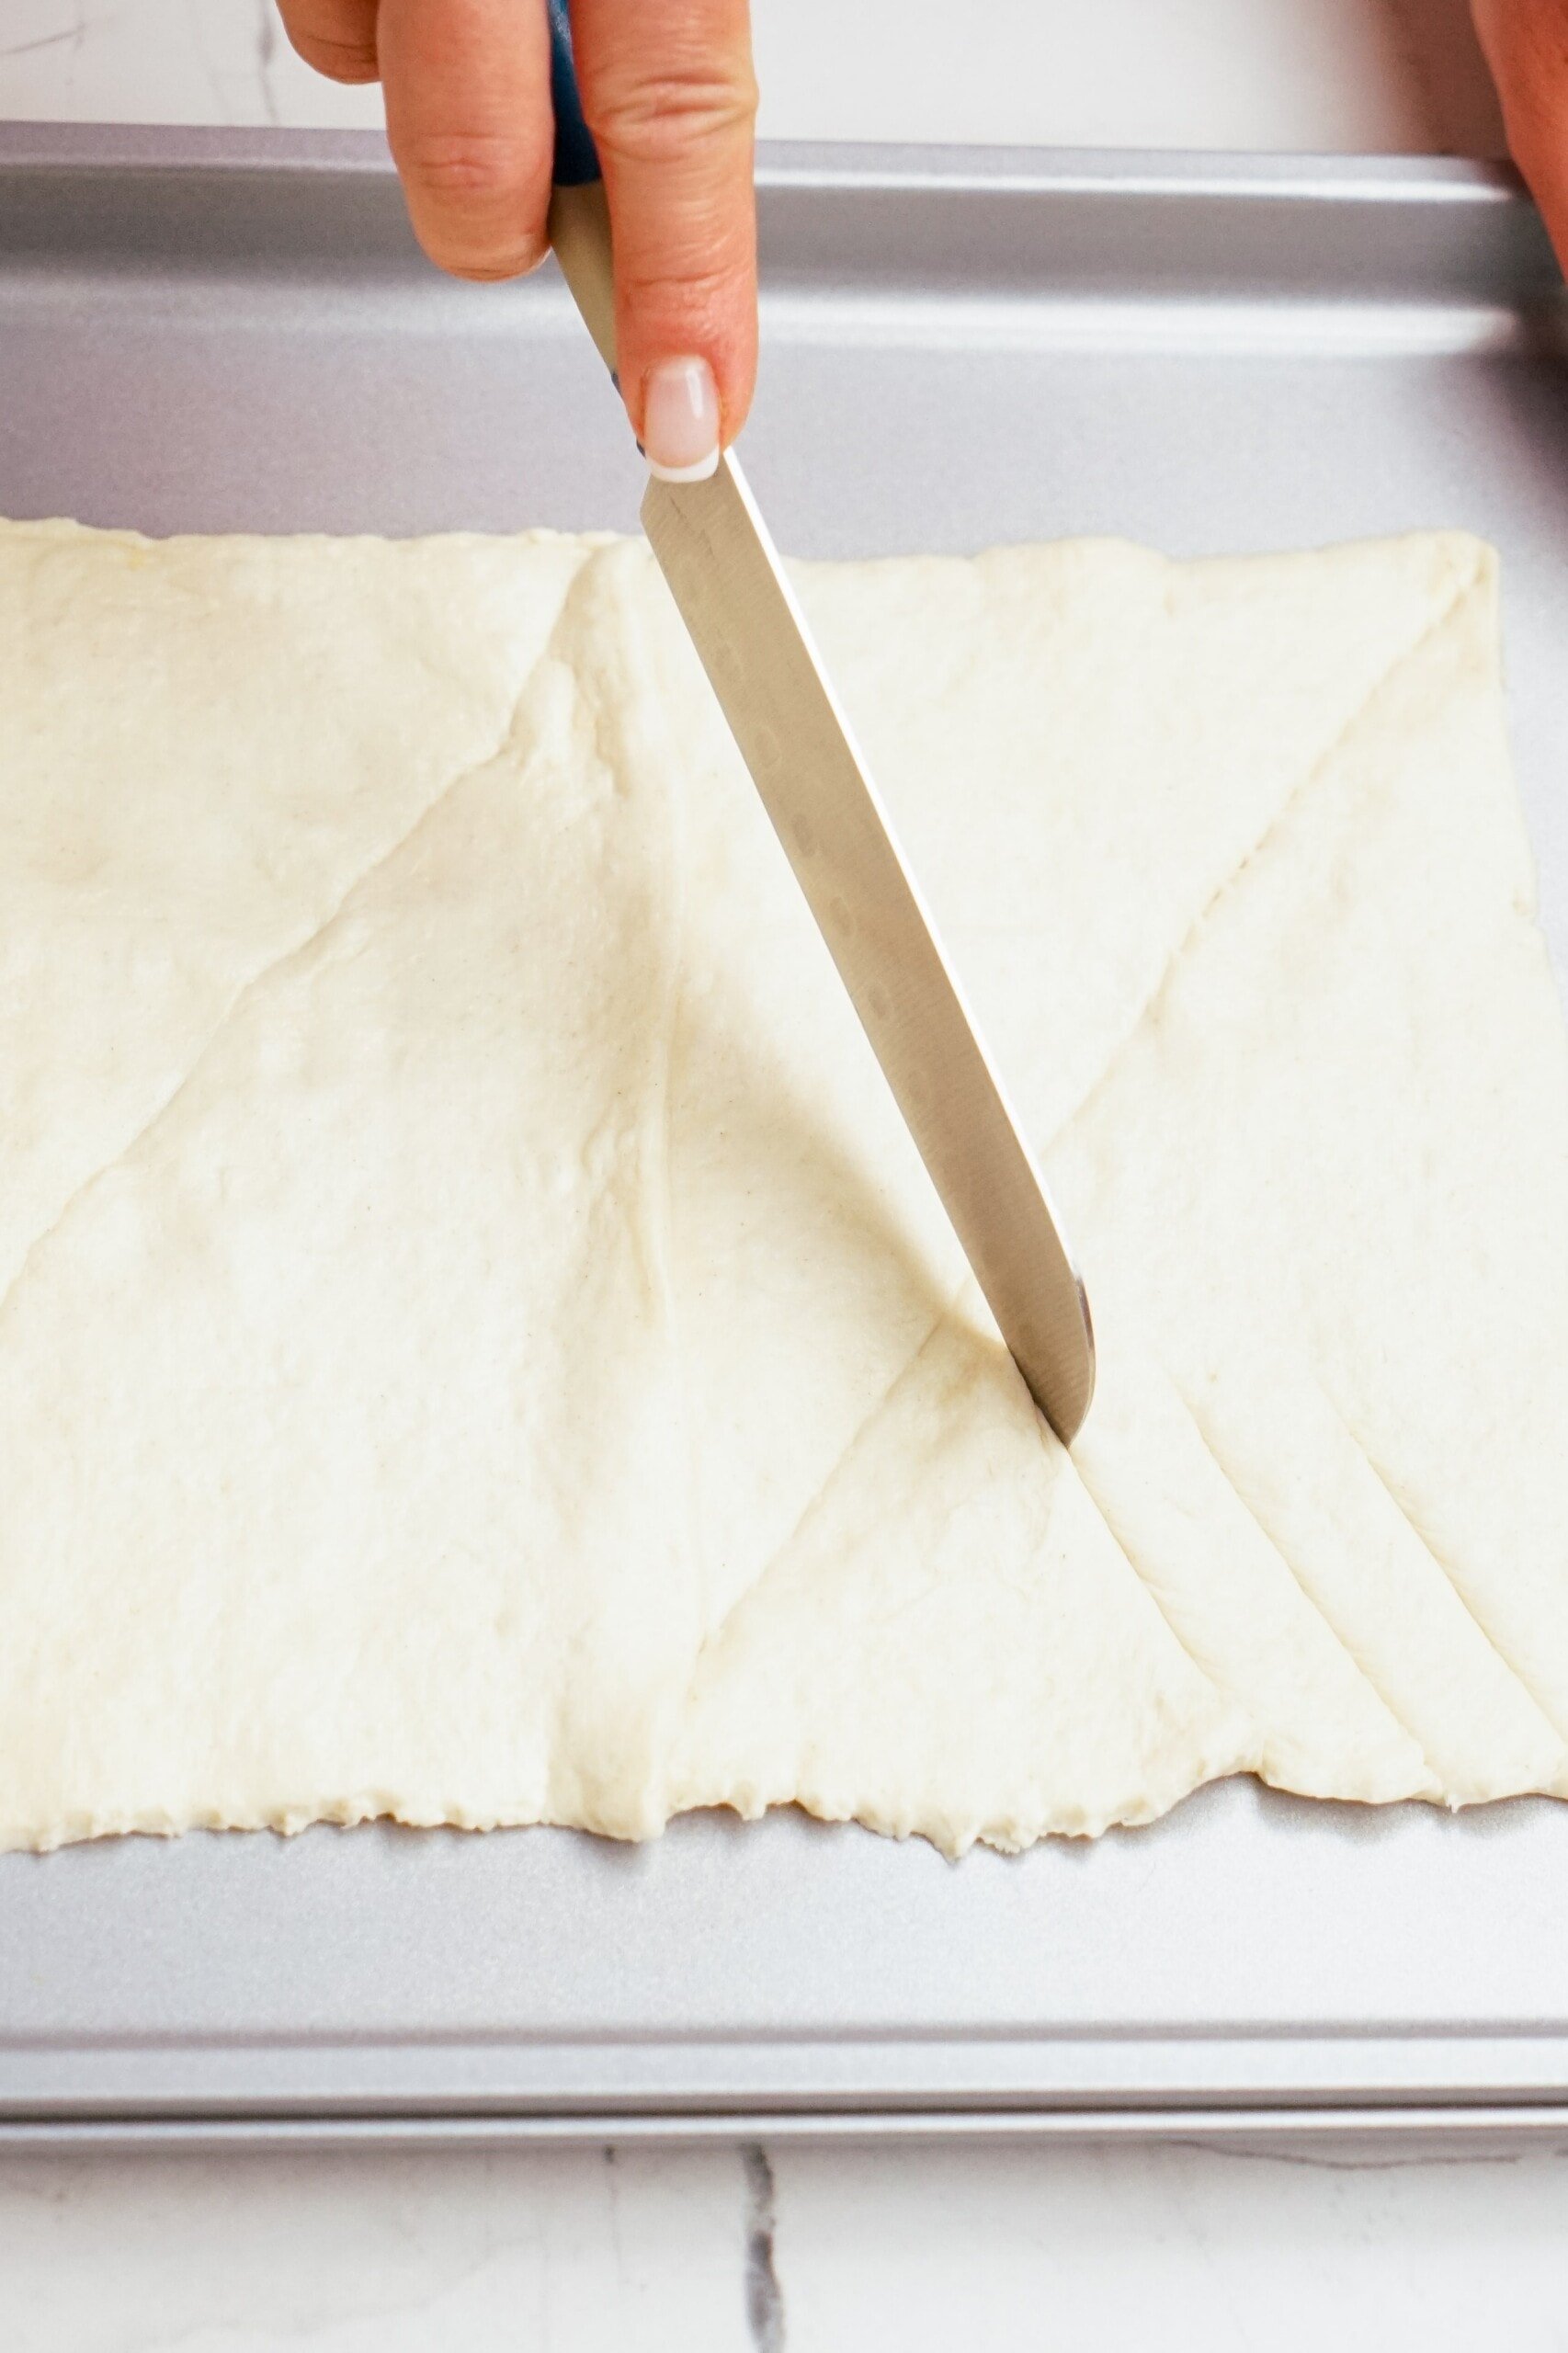 cutting diagonal lines into the crescent roll dough